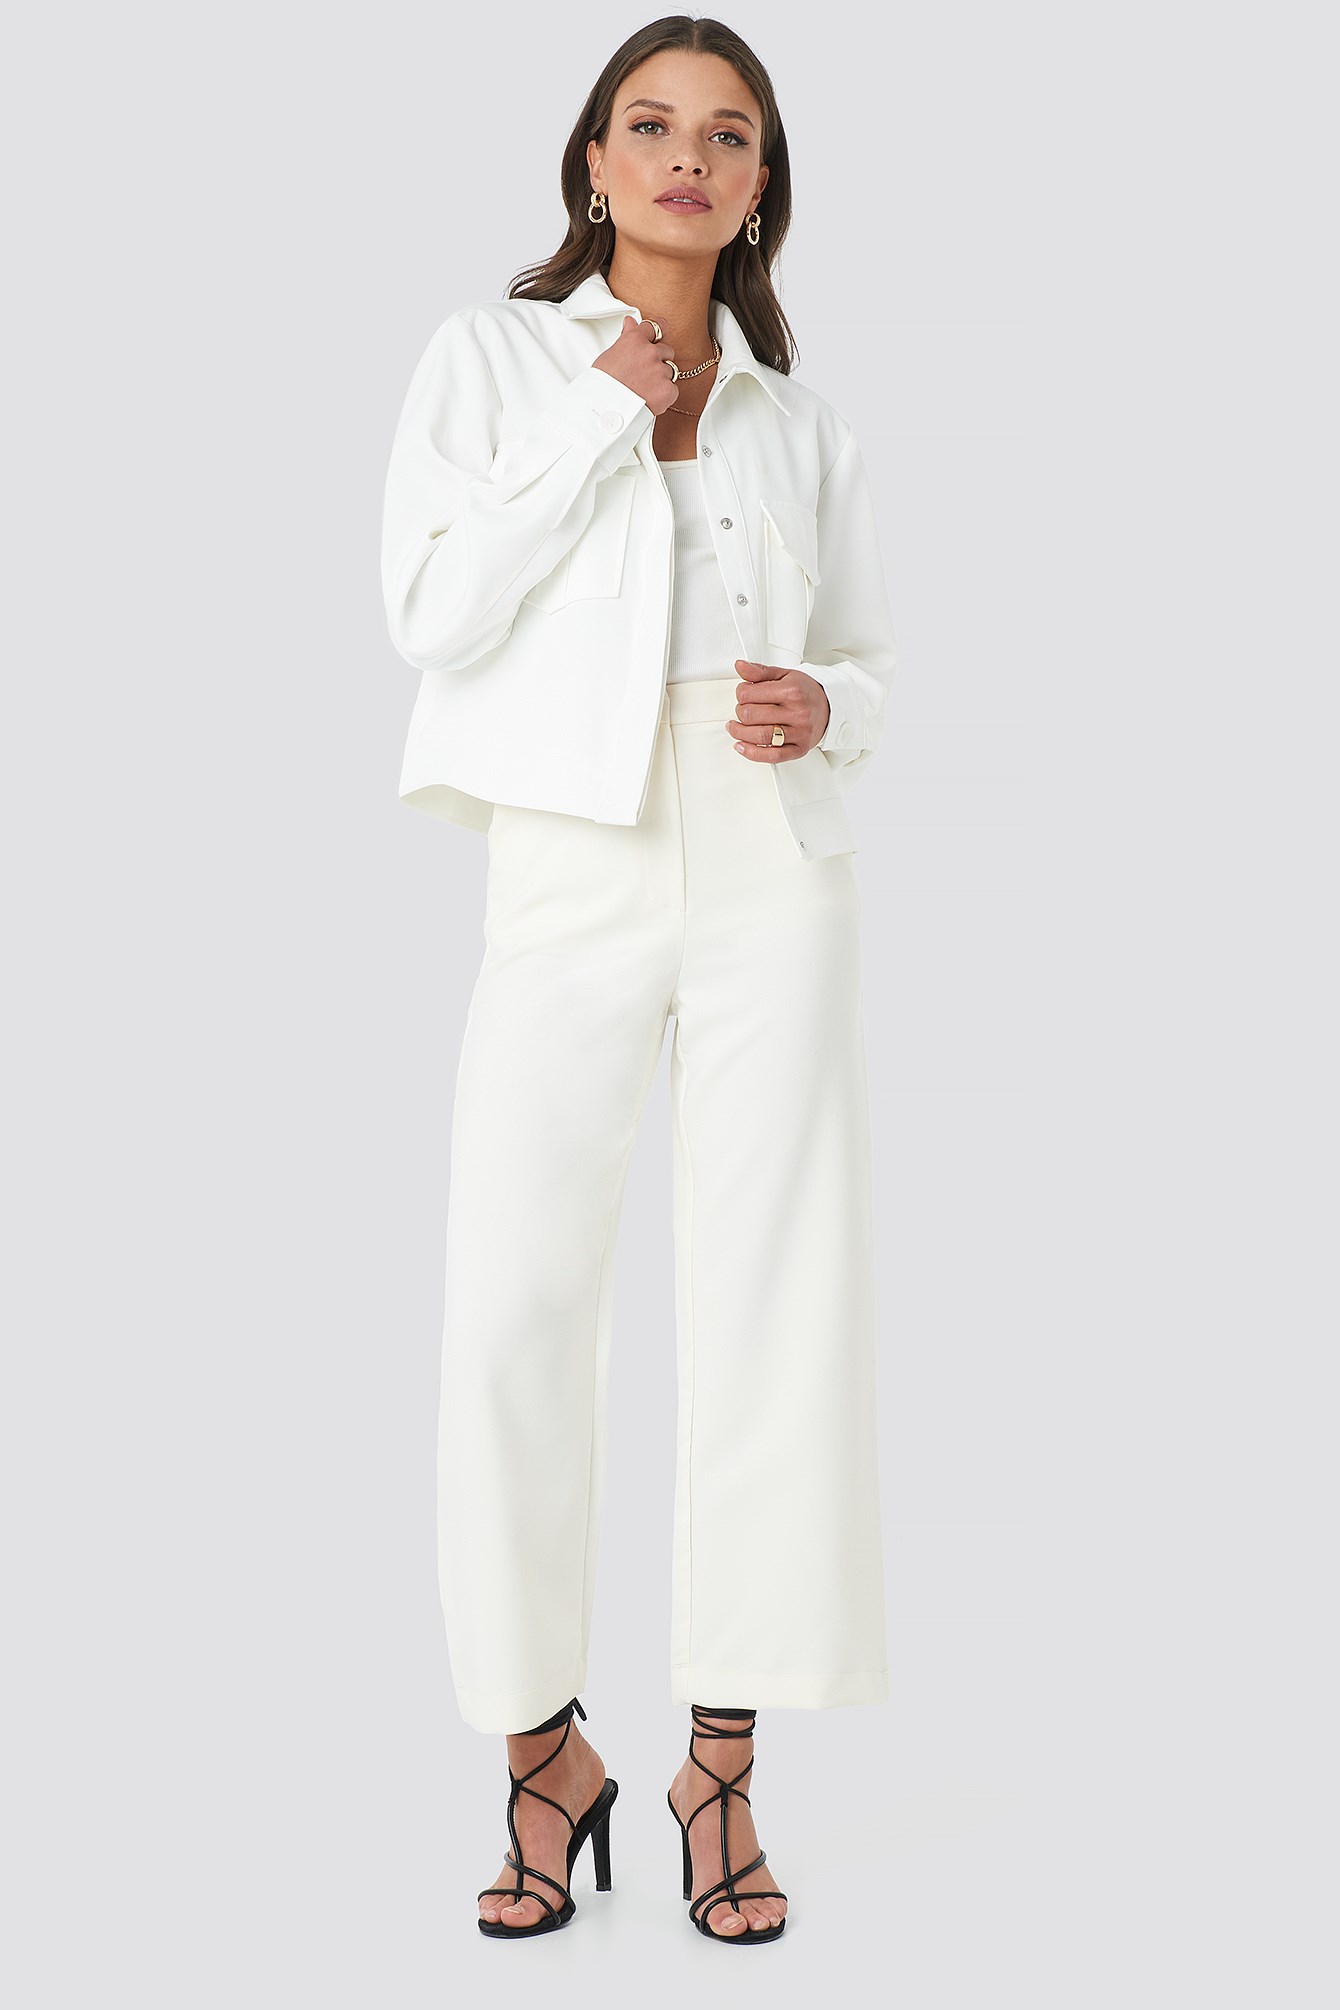 Front Pocket Jacket White Outfit